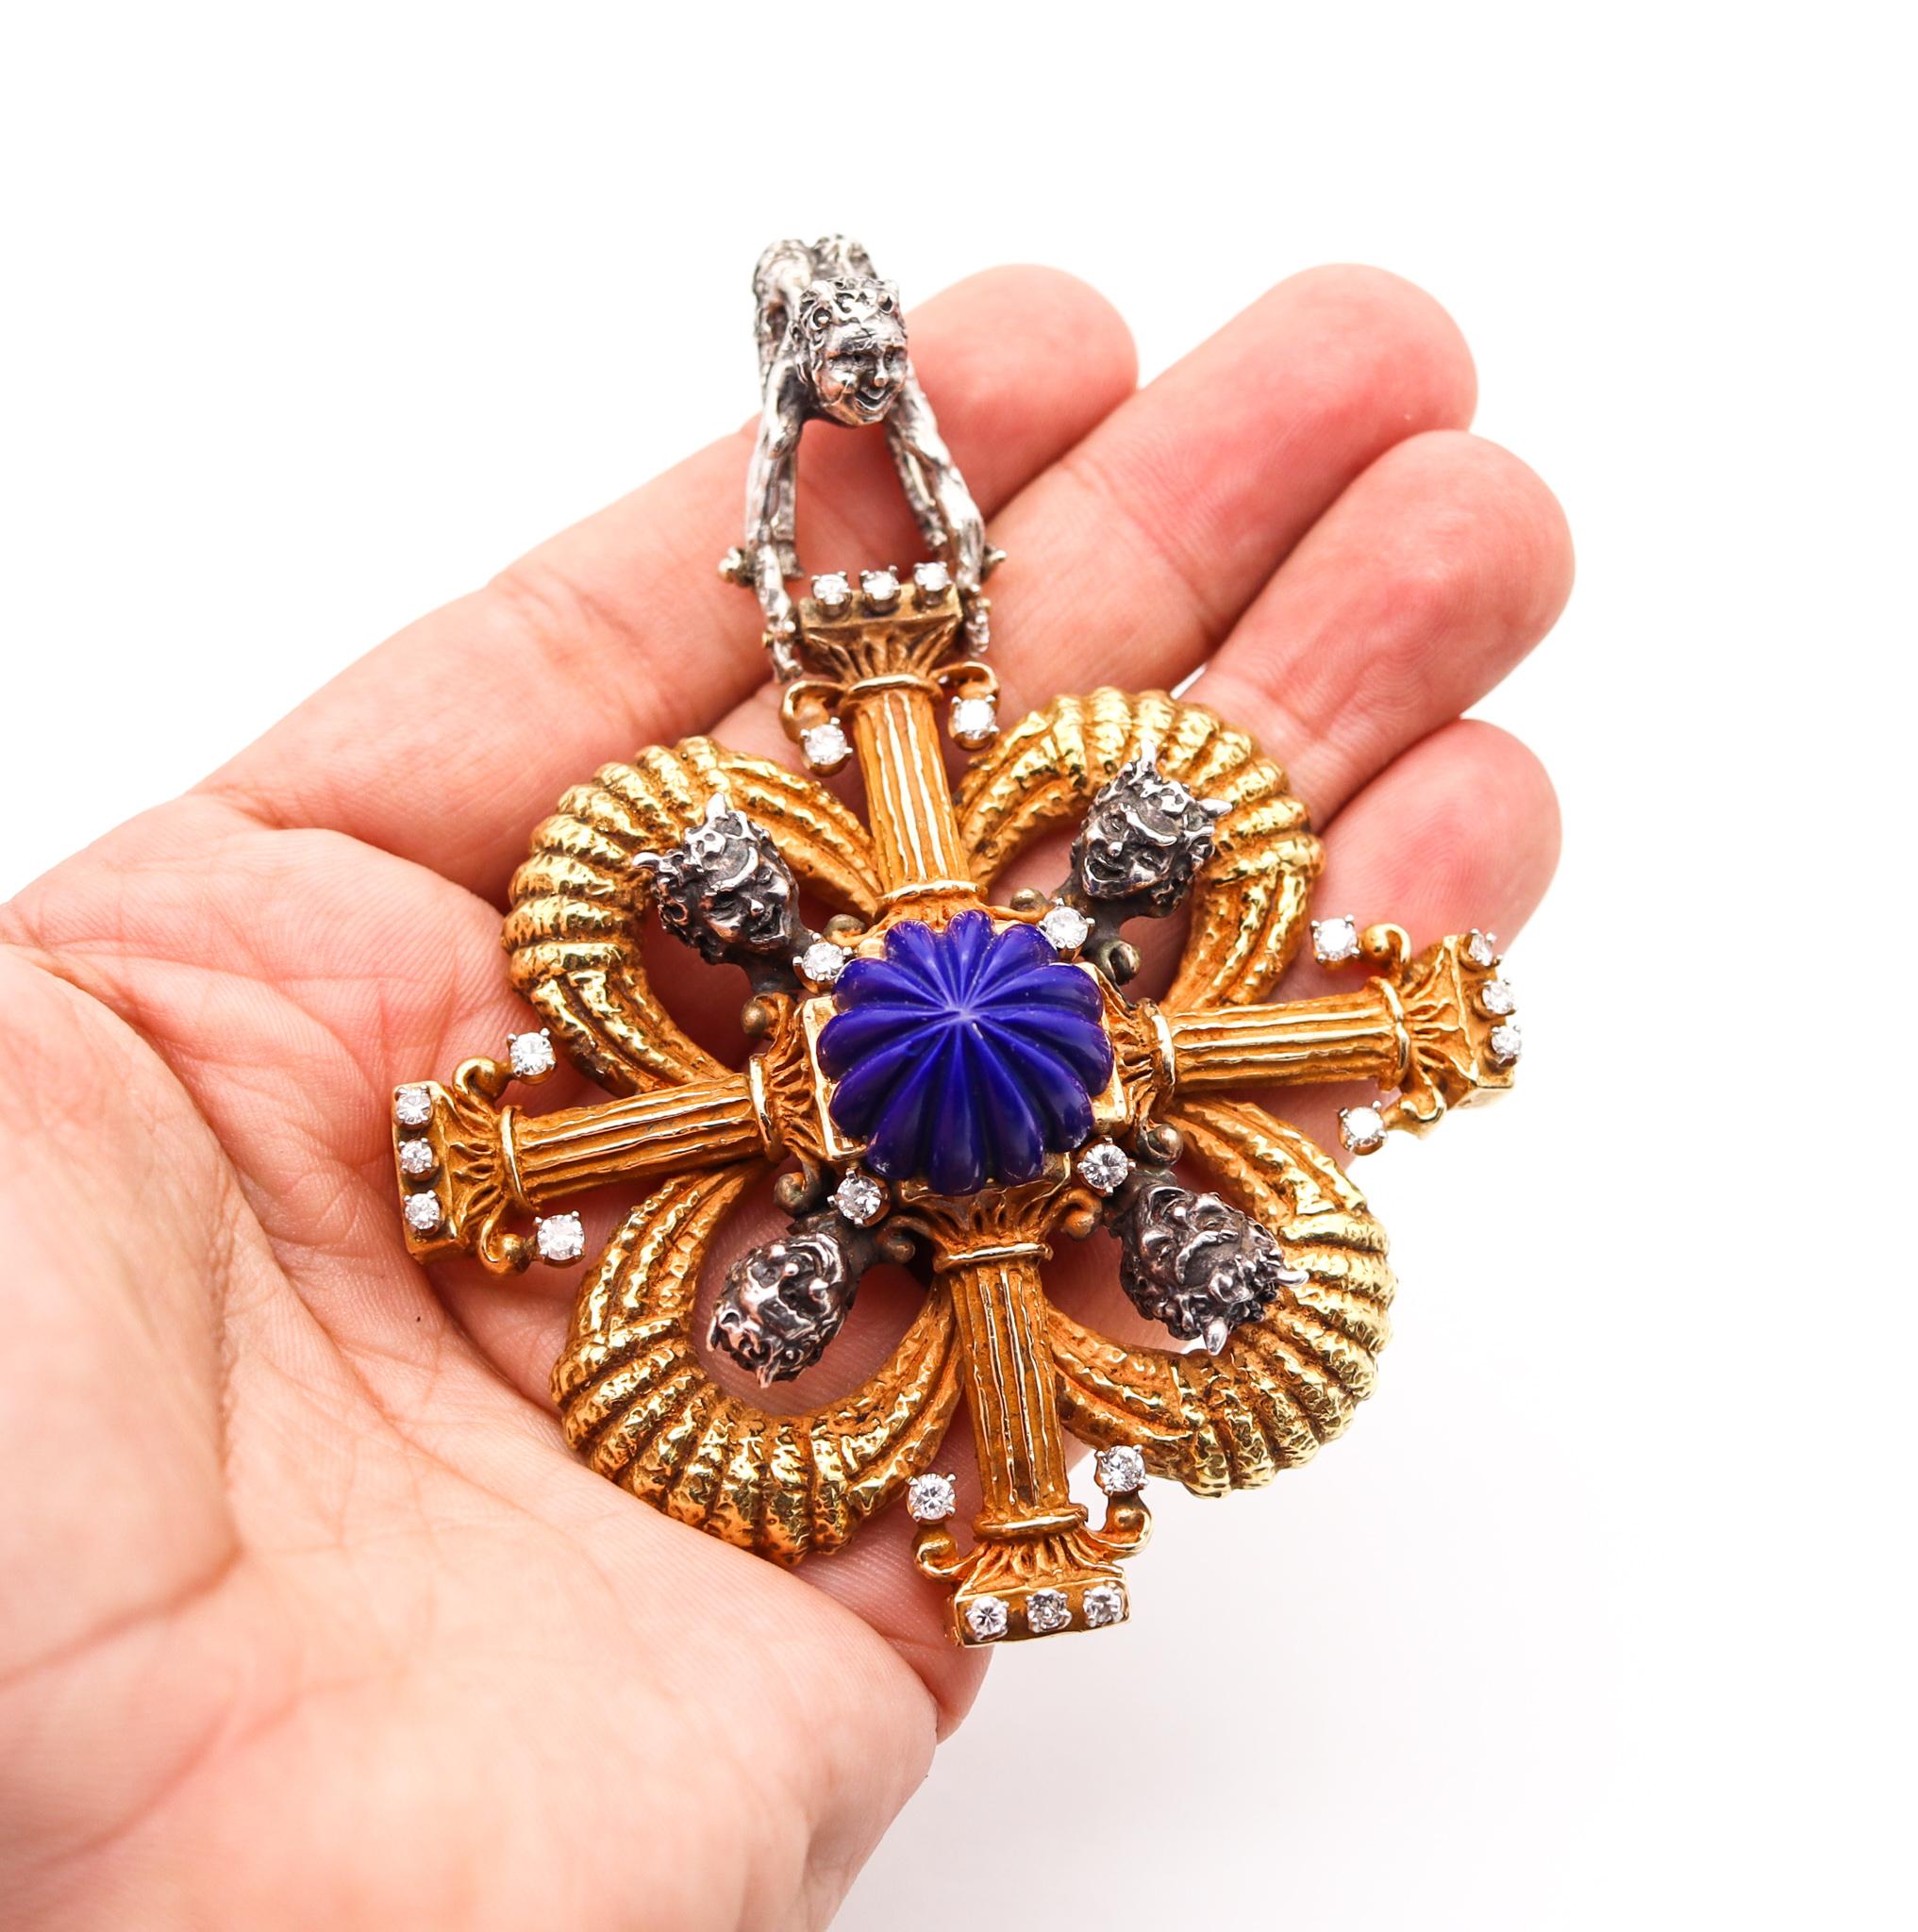 Women's Erwin Pearl 1970 Renaissance Revival Pendant in 18Kt Gold with 31.94 Ctw in Gems